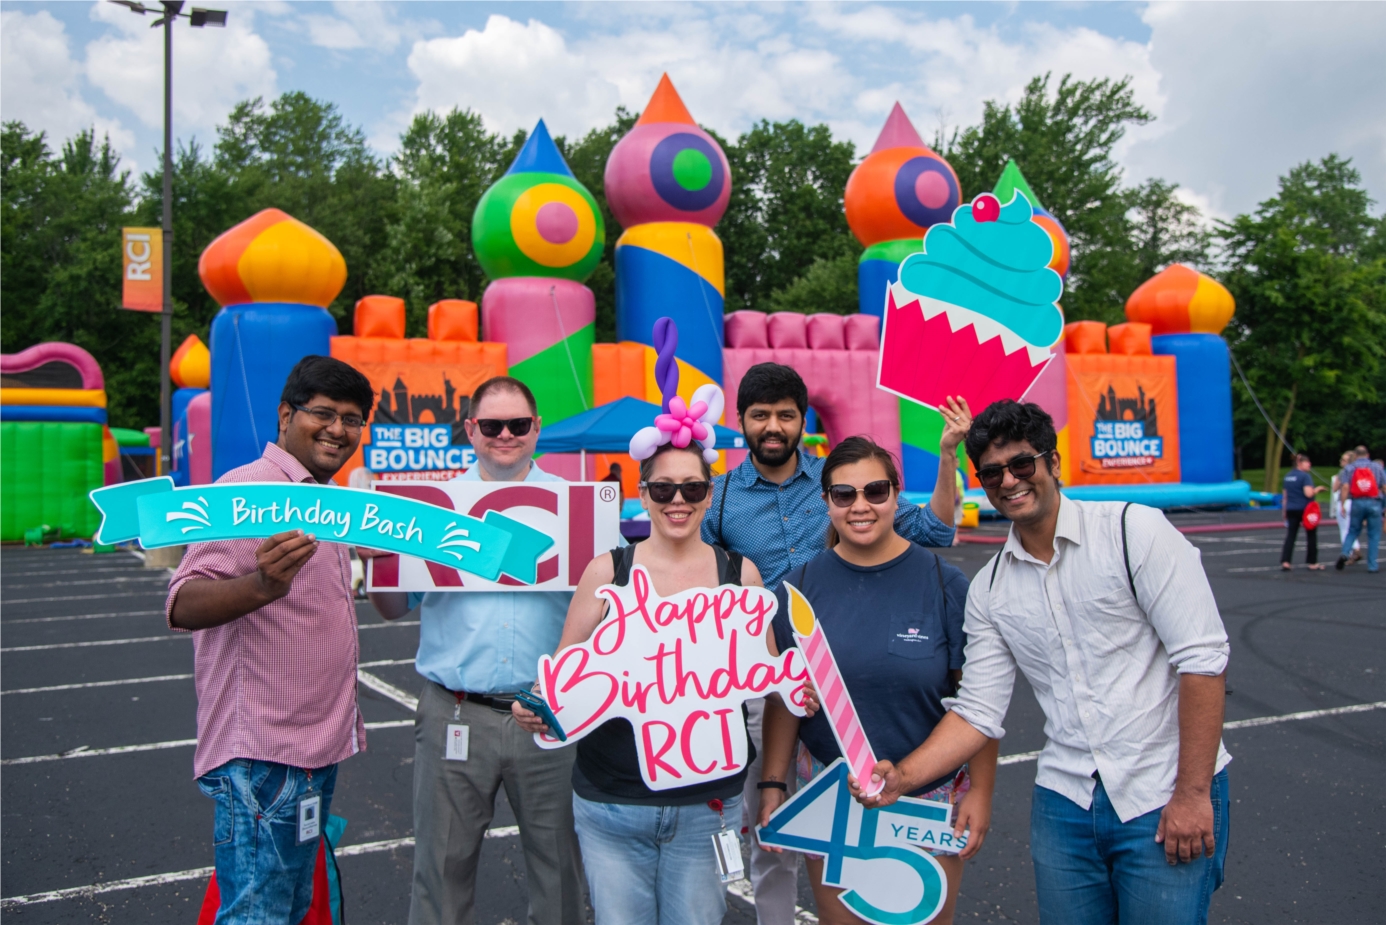 RCI Celebrated 45 years with a Birthday Bash and the world's largest bounce house!